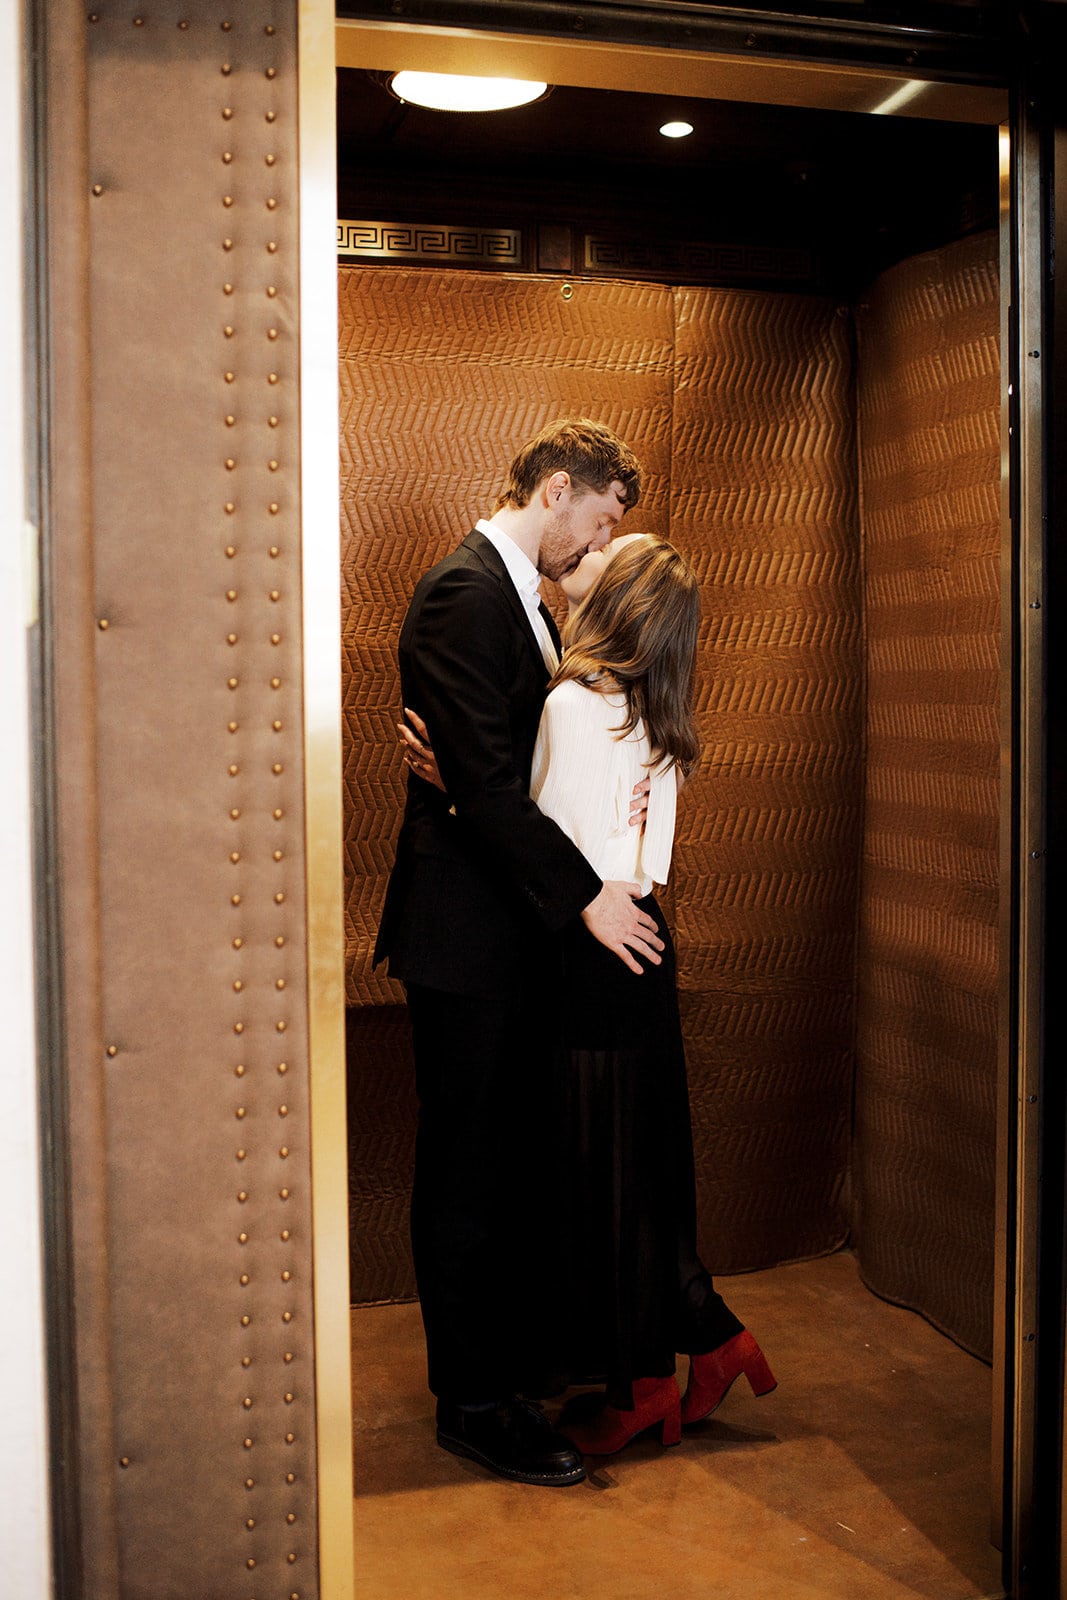 edgy Washington DC engagement photos at national portrait gallery engagement session romance in an elevator L Hewitt Photography
